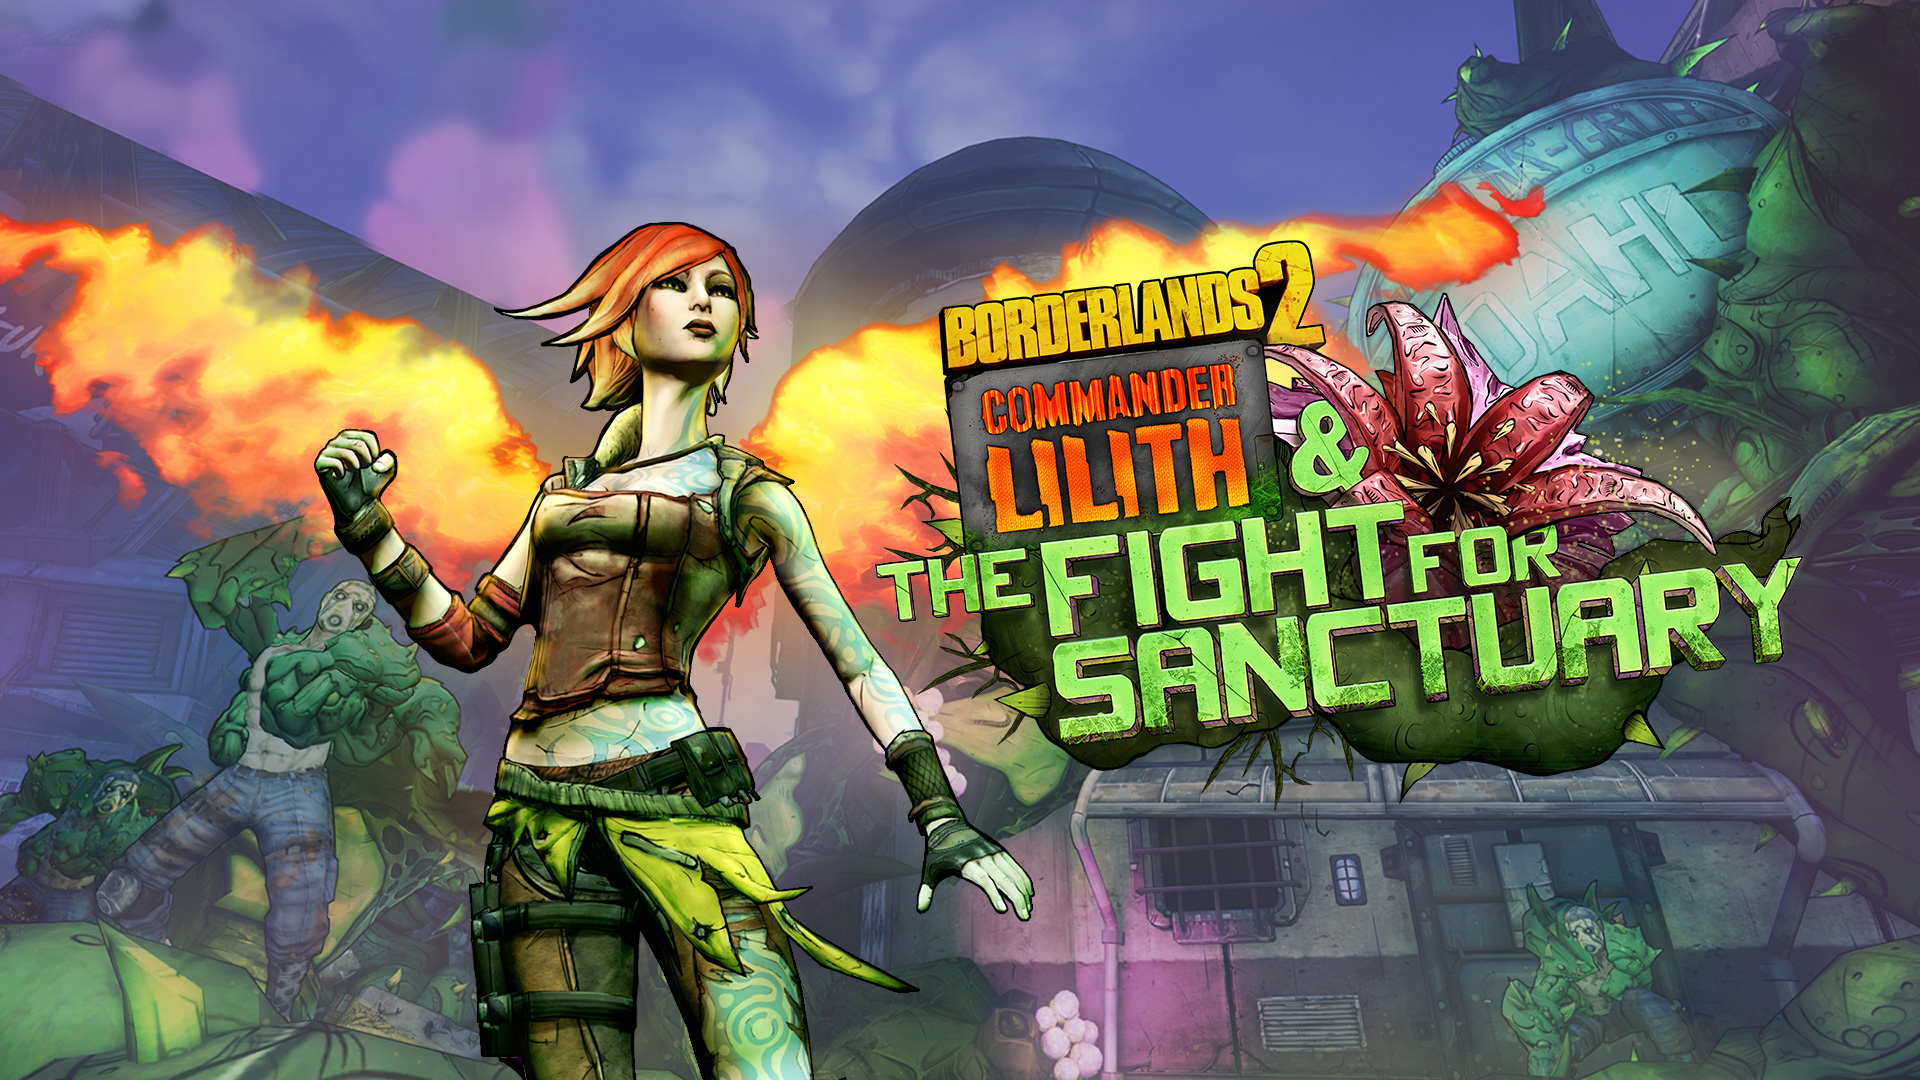 Borderlands nintendo switch. Borderlands 2 Lilith and Fight for Sanctuary. РПГ бордерлендс 2. Borderlands 3 Sanctuary. Lilith Commander на карте.